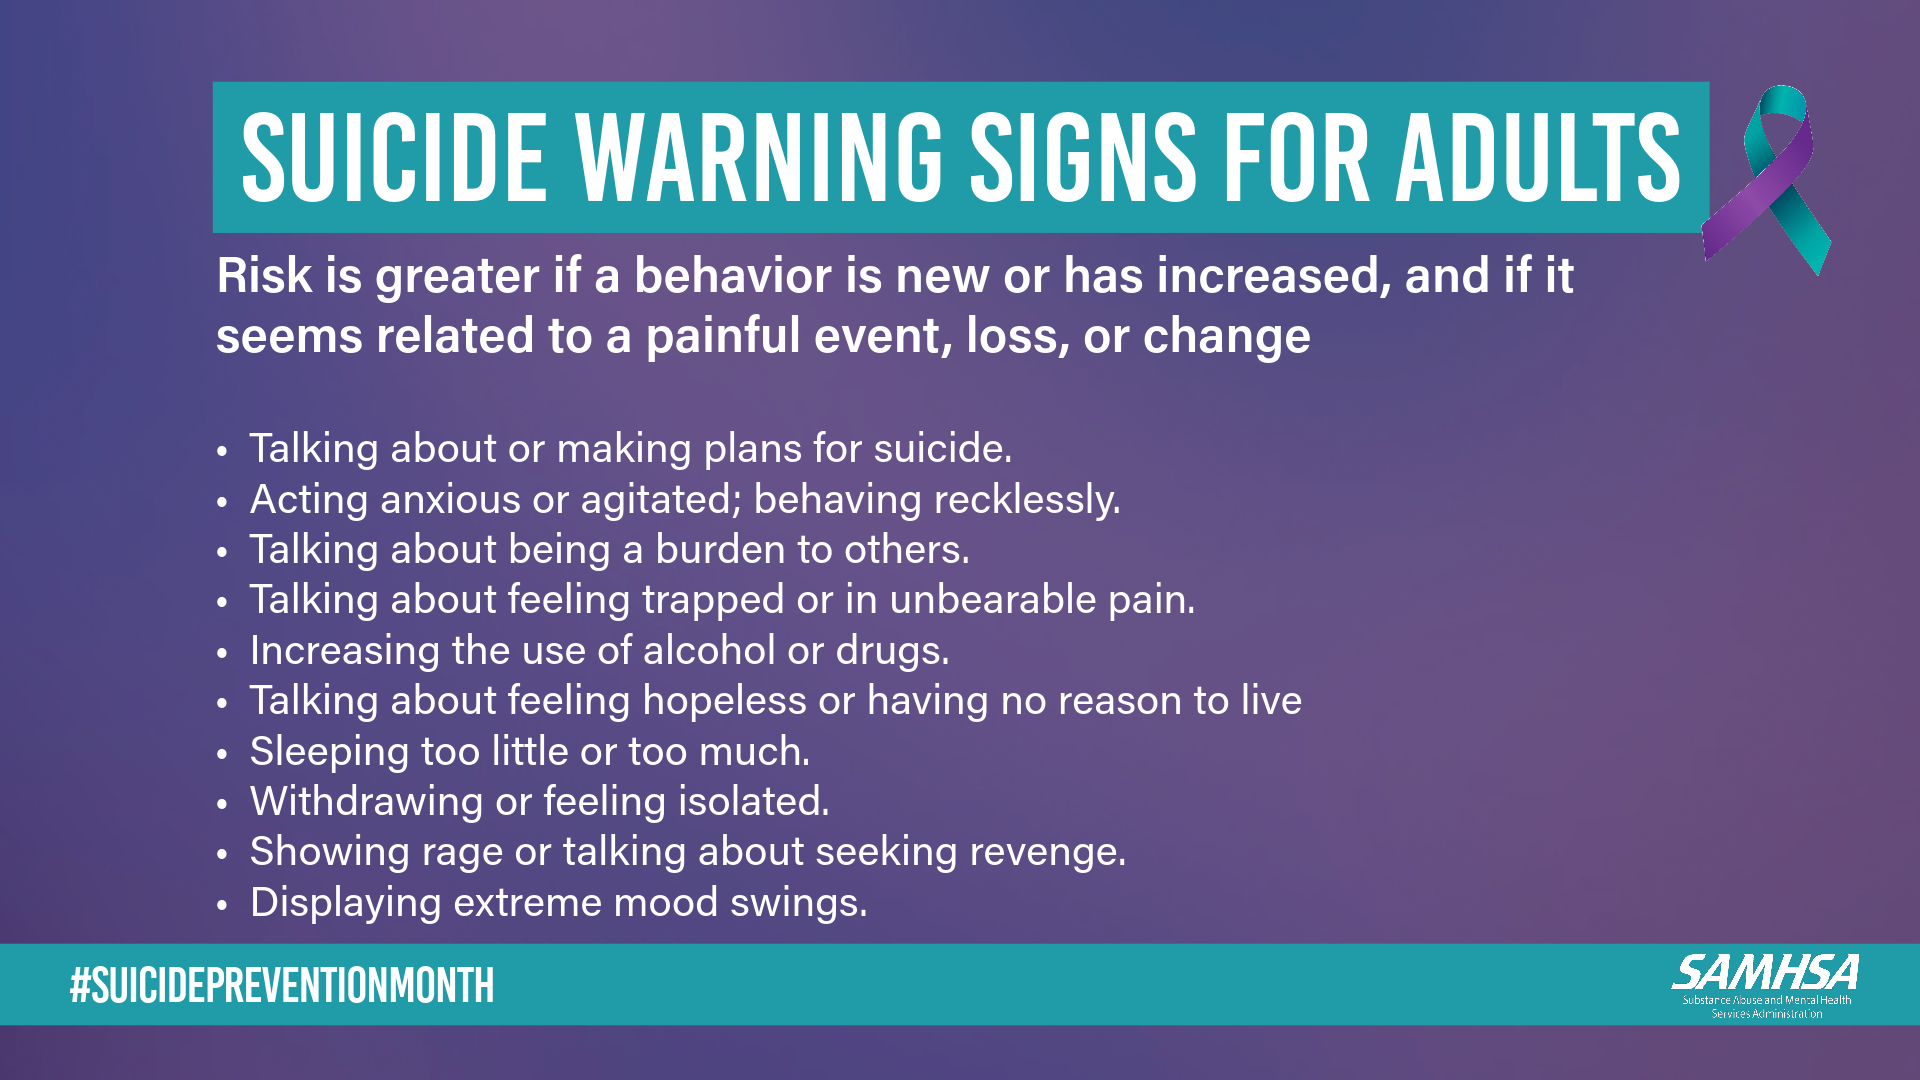 SAMHSA Suicide Warning Signs for Adults Health Promotion